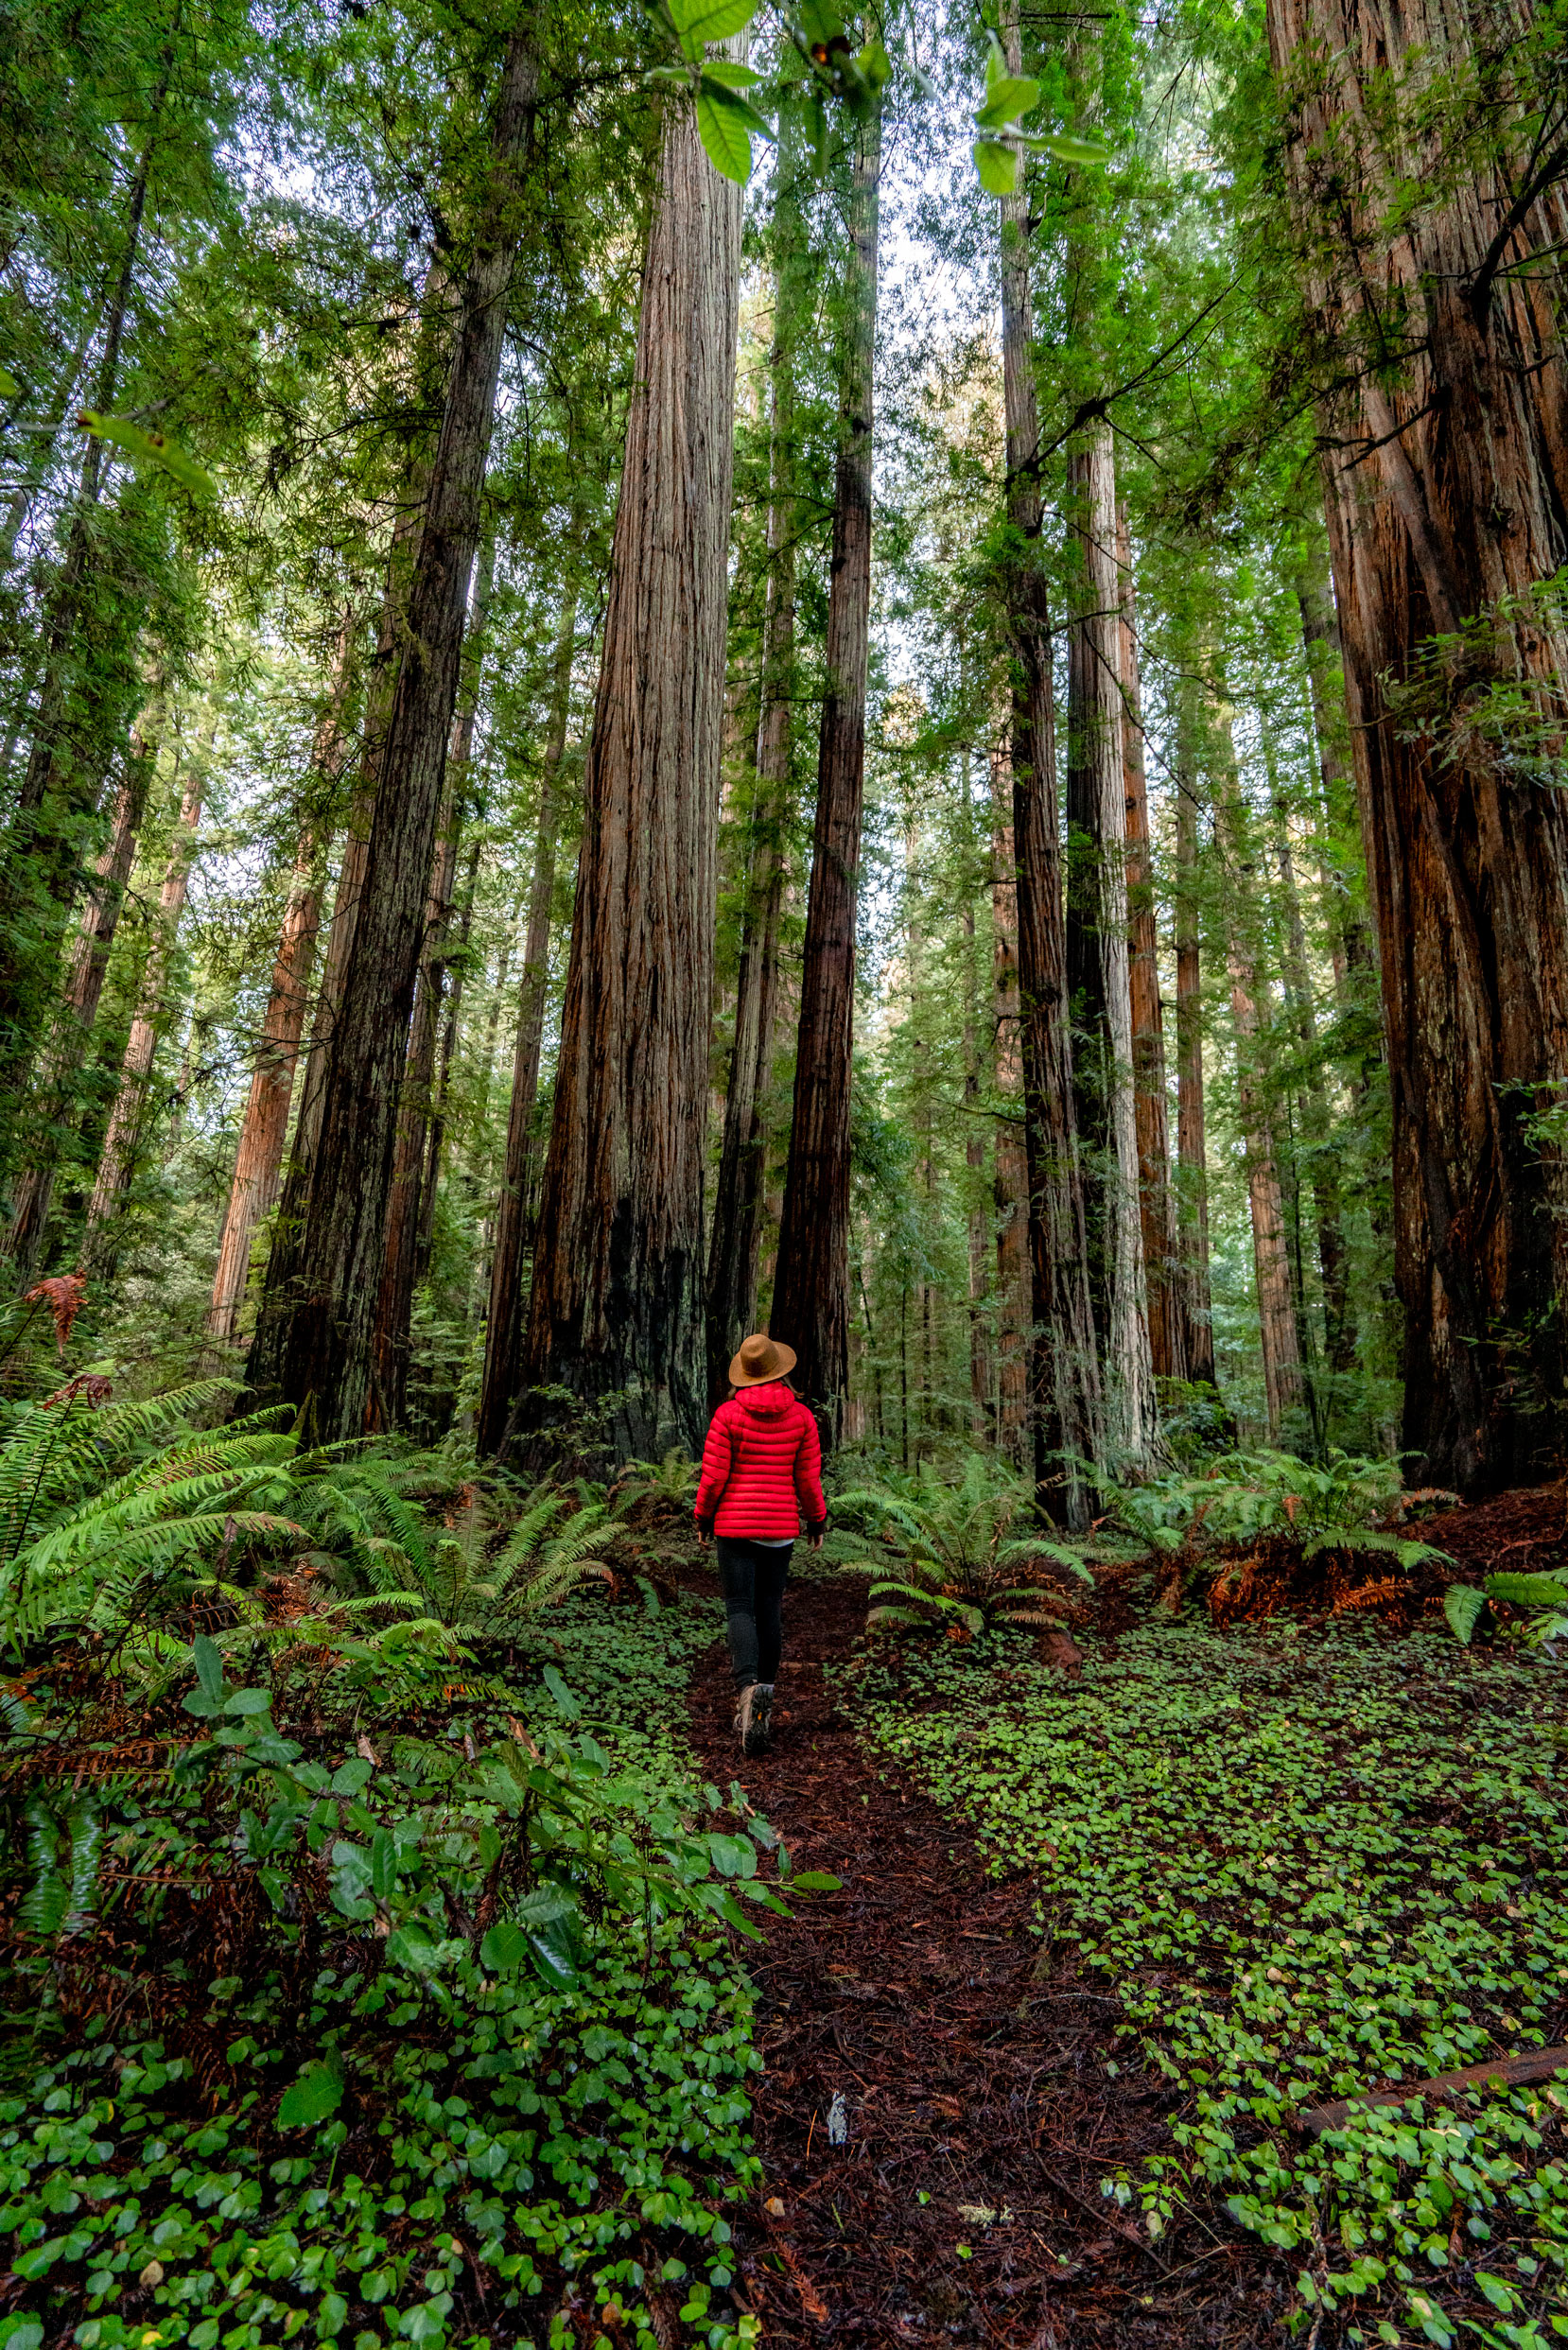 8 BEST National Parks Near San Francisco to Visit (Expert Guide)